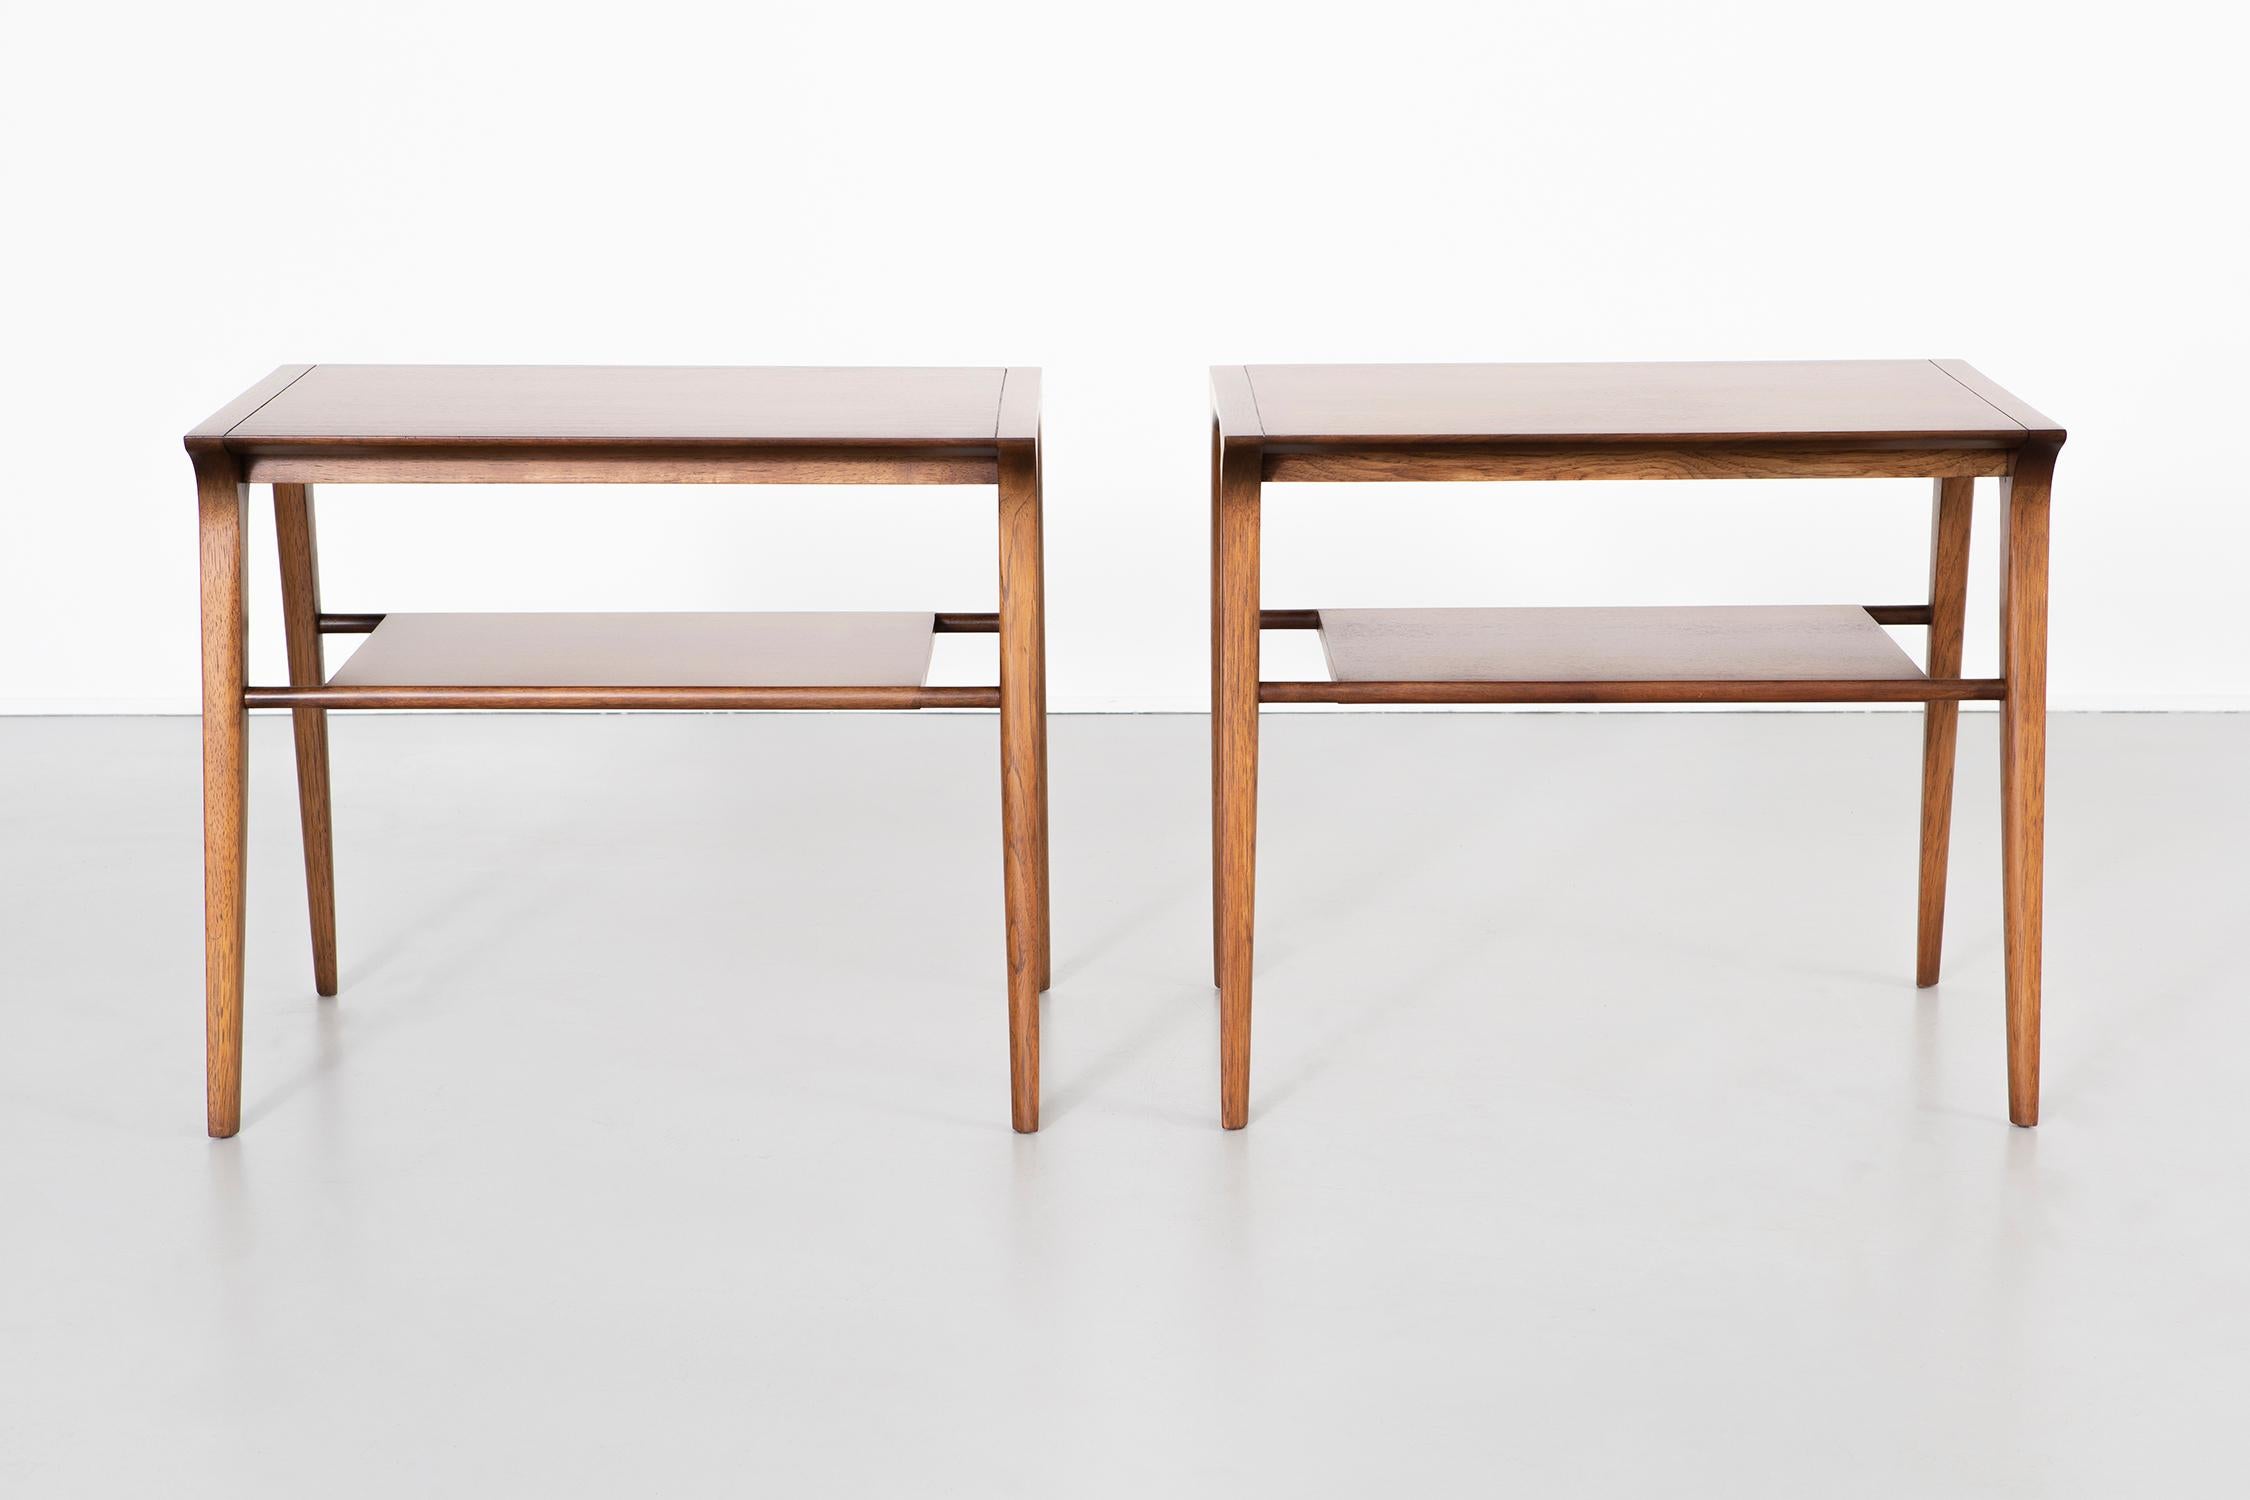 Set of two side tables.

Designed by John Van Koert for Drexel.

USA, circa 1960s.

Walnut.

Measures: 24 ¼” H x 28” W x 18” D. 

Freshly restored in impeccable condition.
 